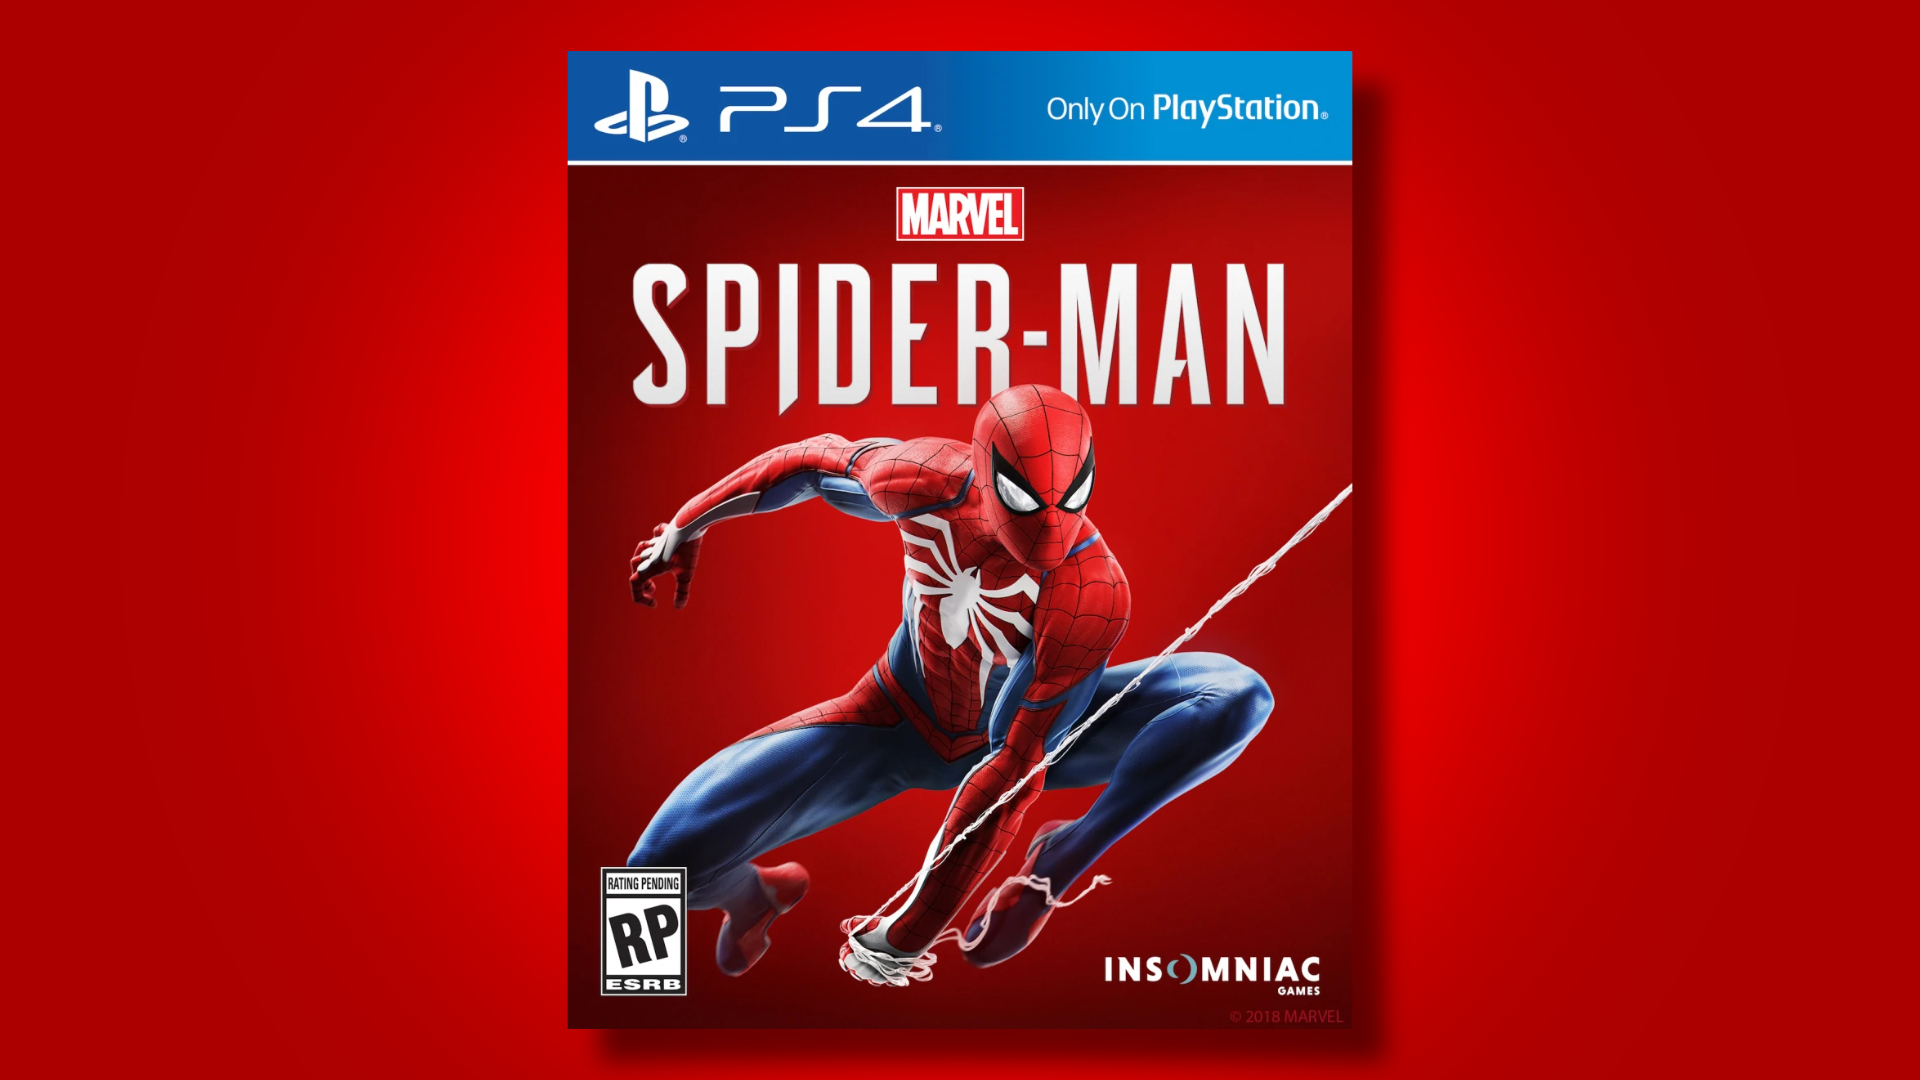 Save on Marvel's Spider-Man: Miles Morales Ultimate Edition for